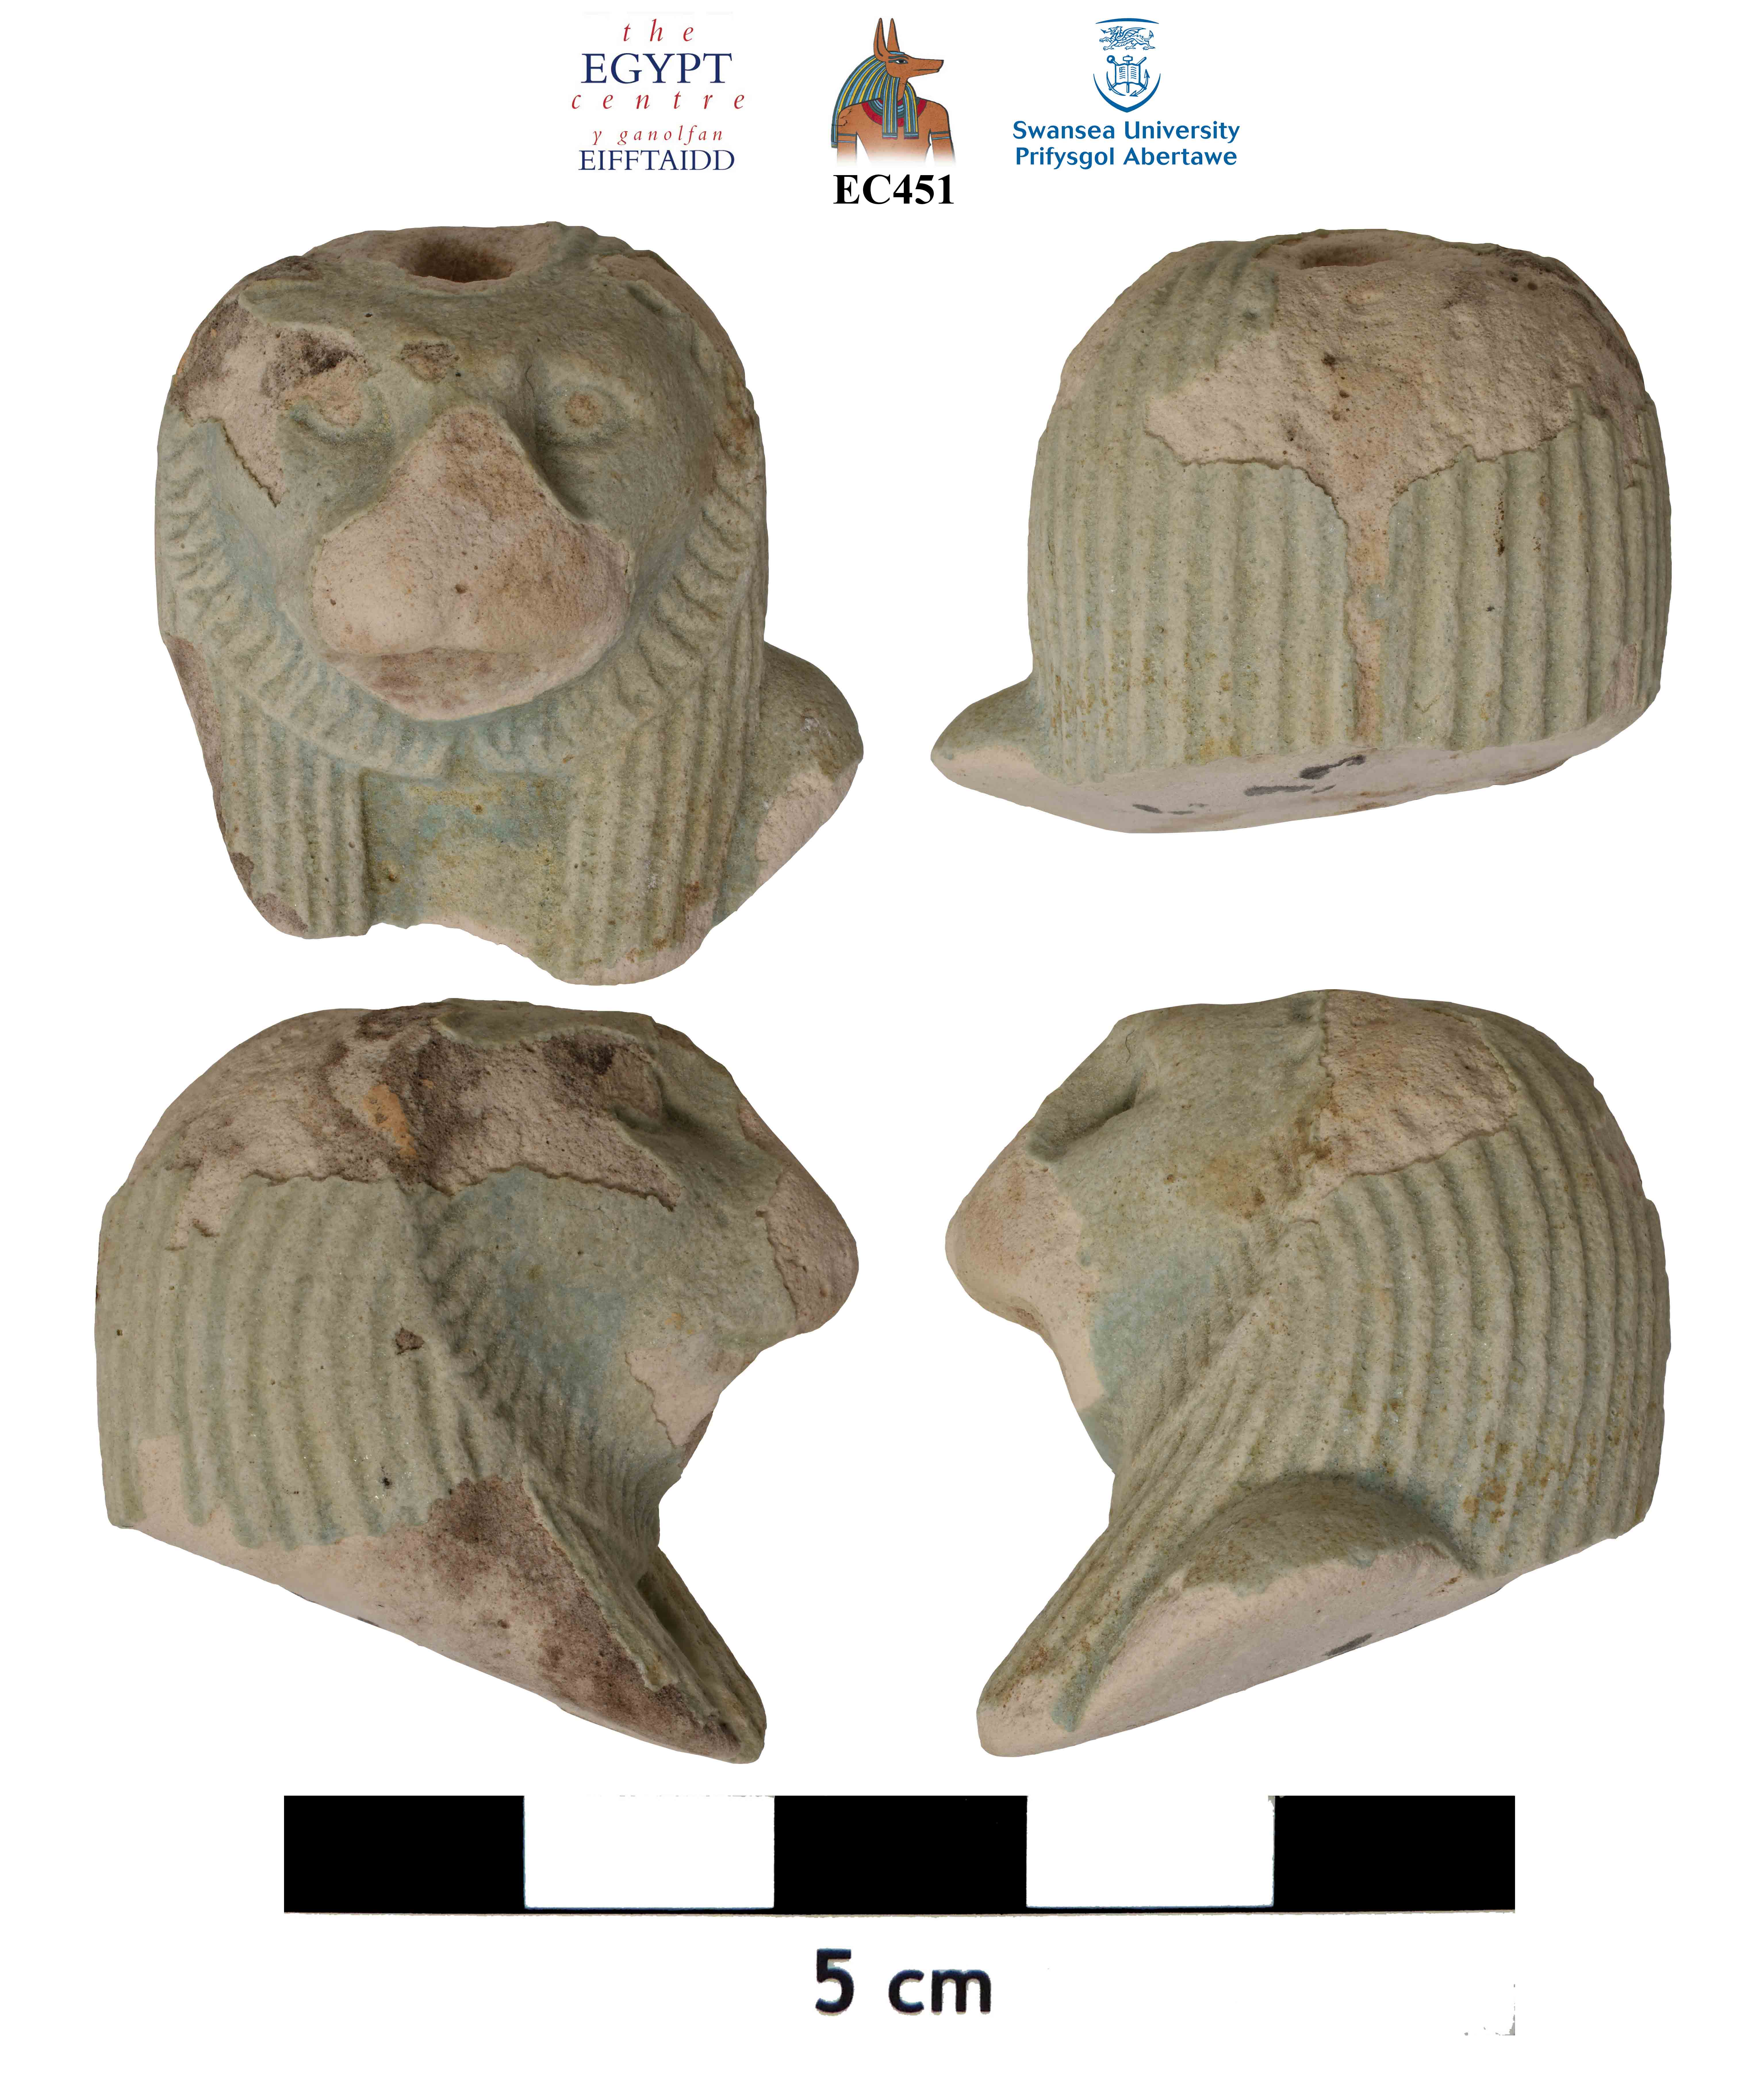 Image for: Faience lion head